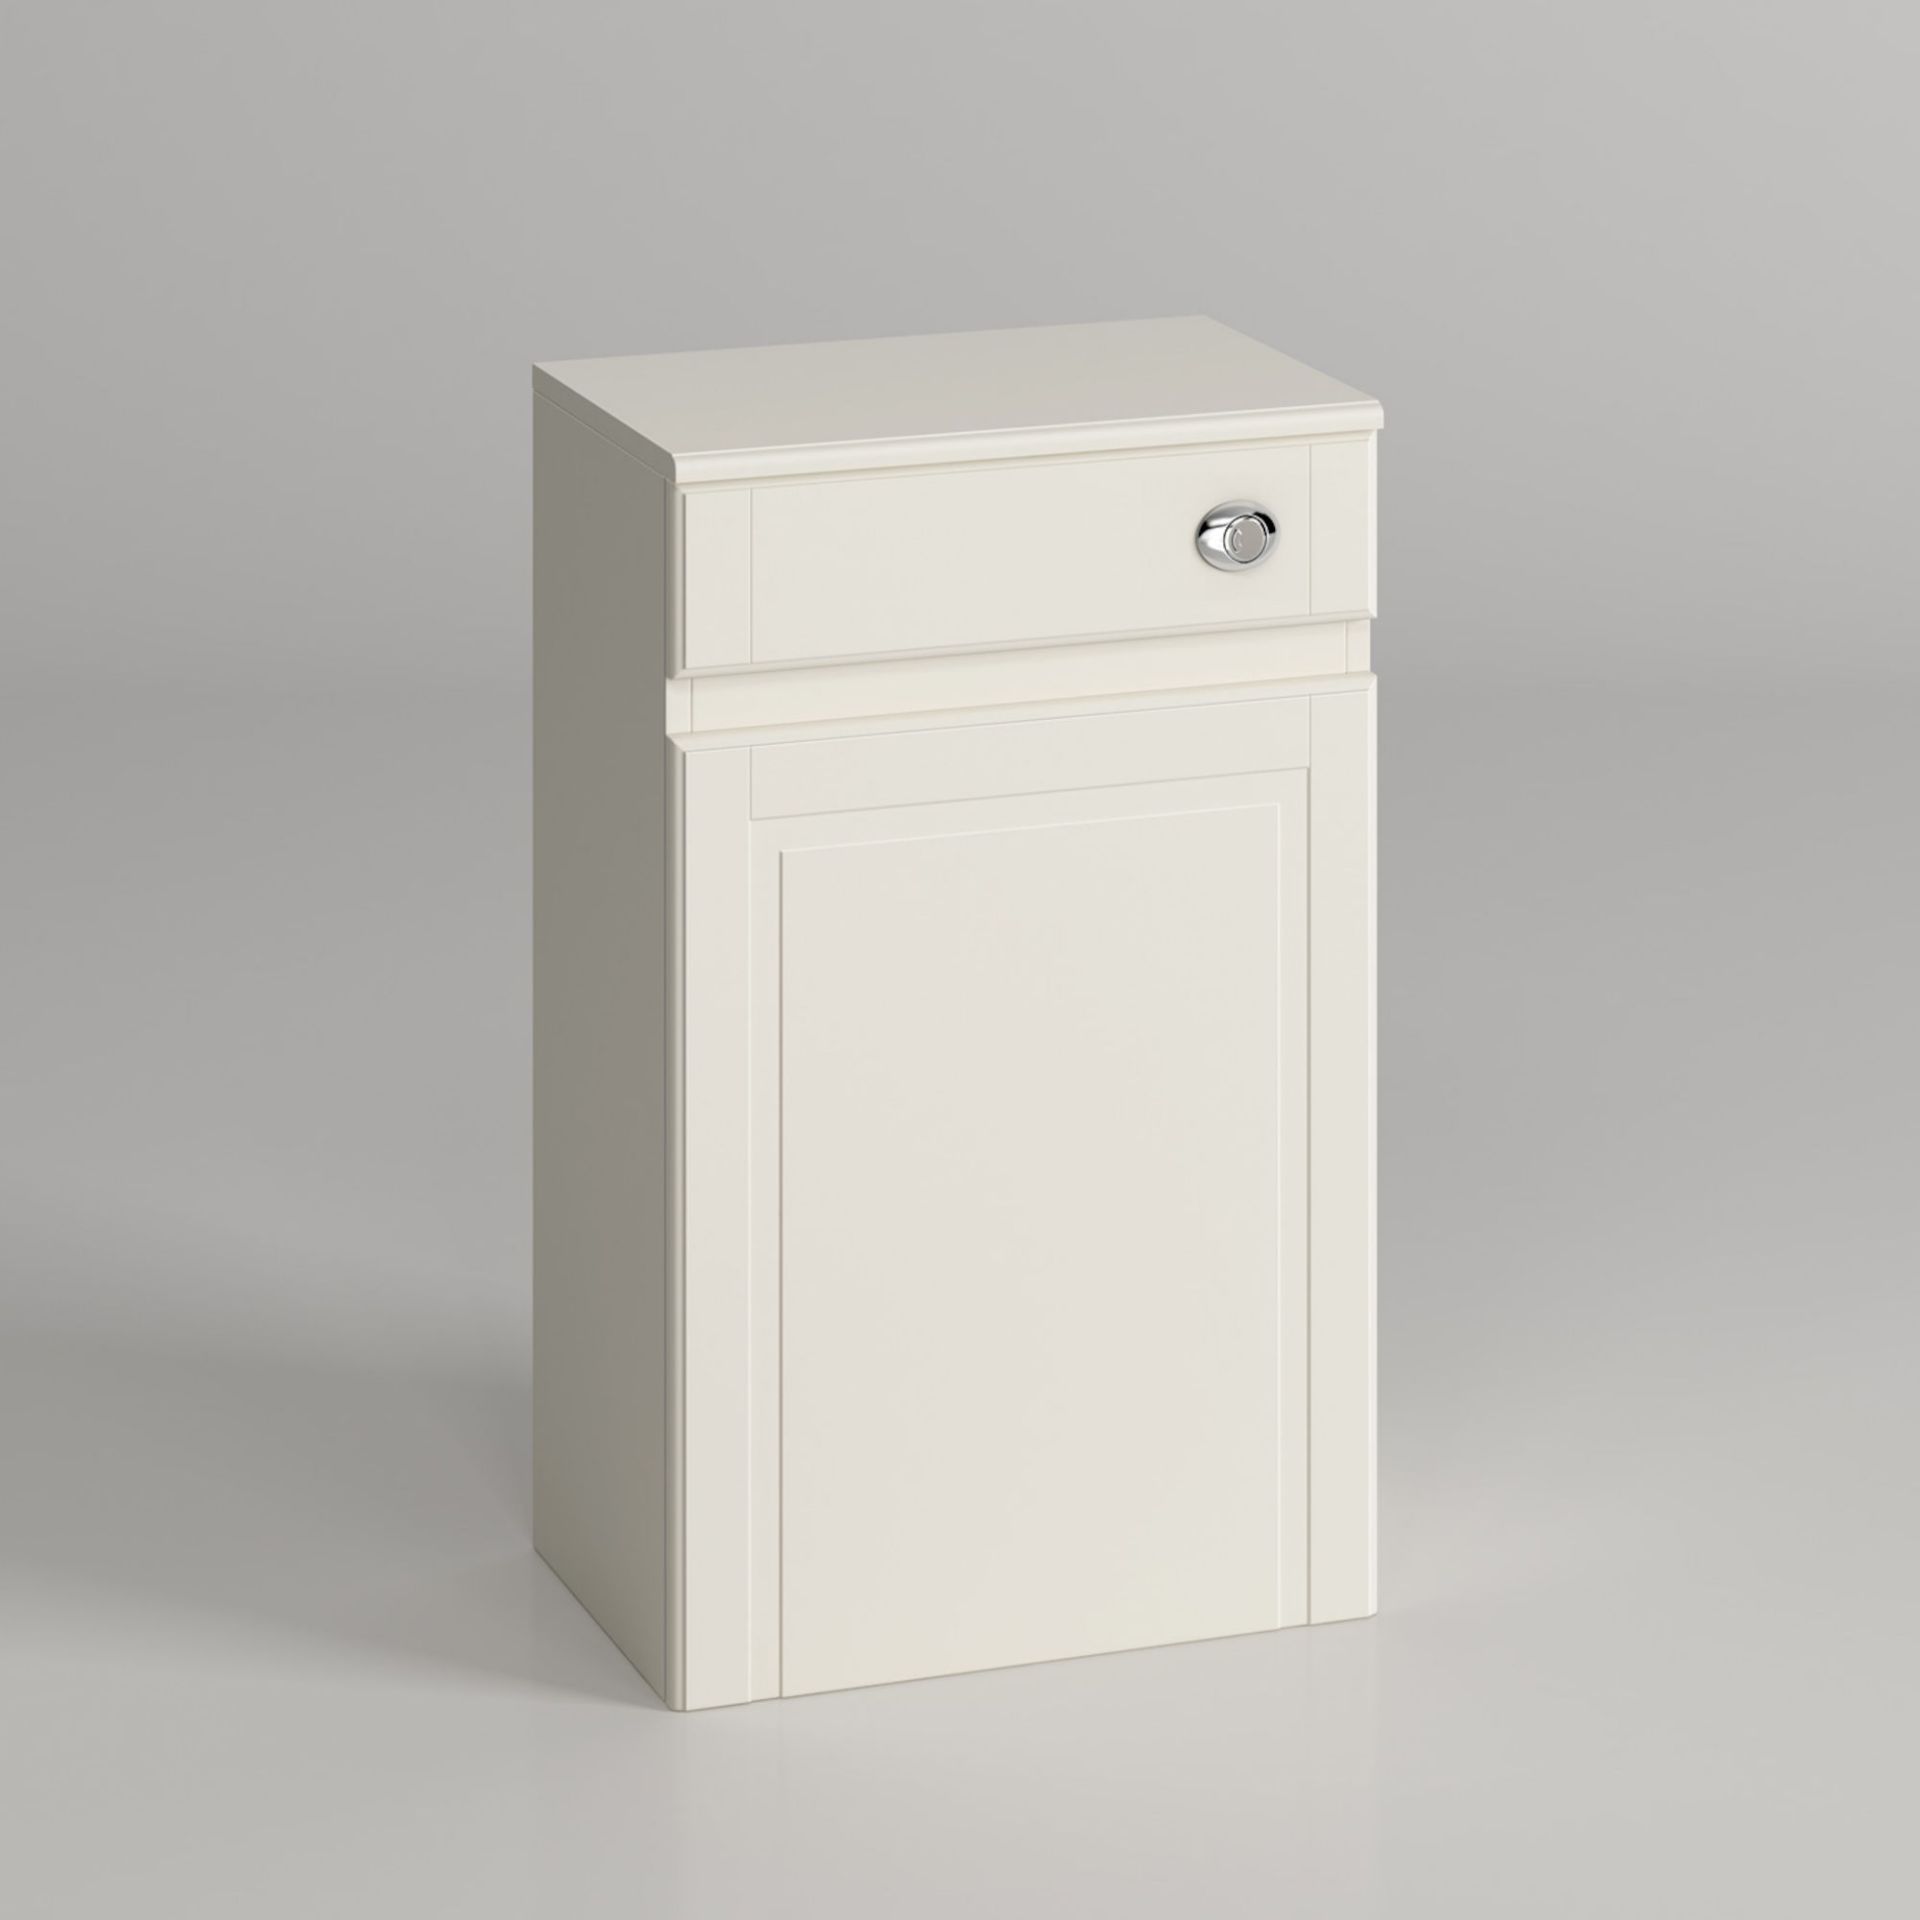 (LP85) 500mm Cambridge Clotted Cream Back To Wall Toilet Unit. Our discreet unit cleverly houses any